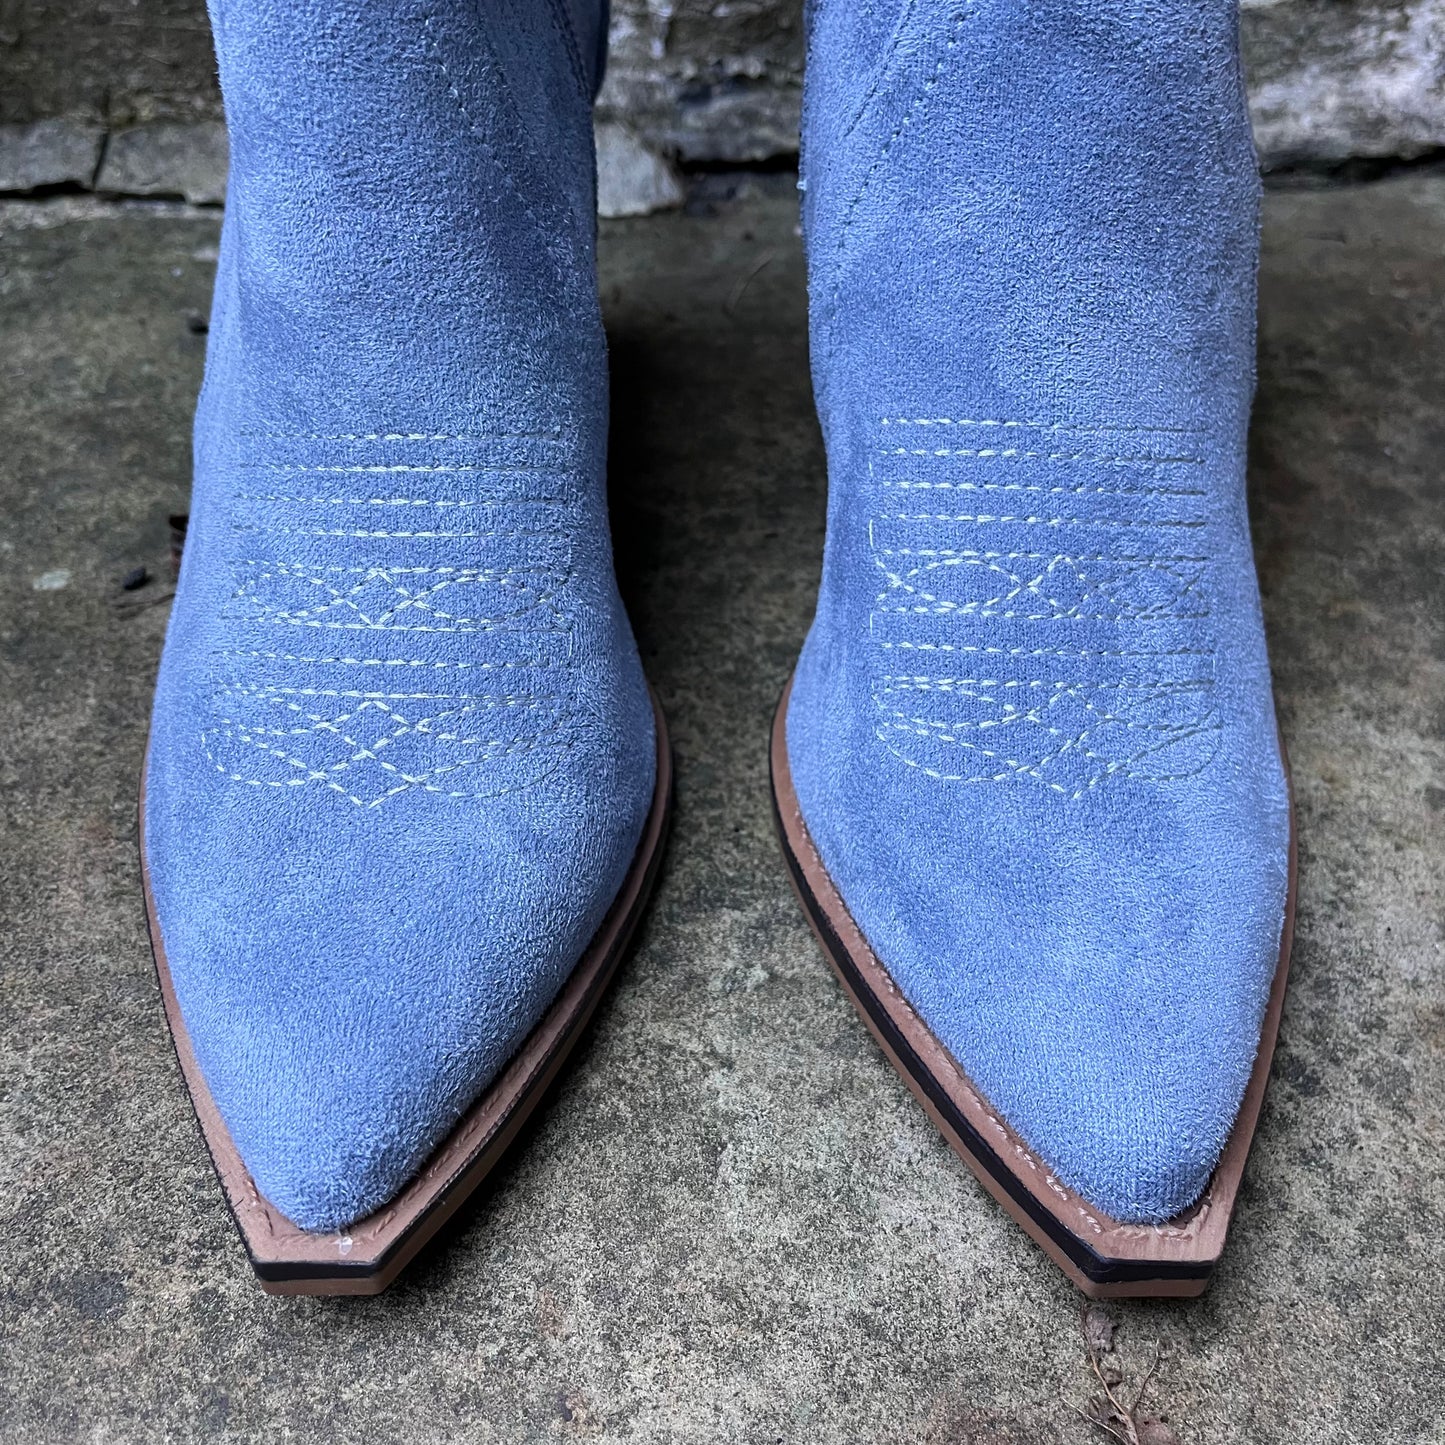 Western boots - blue